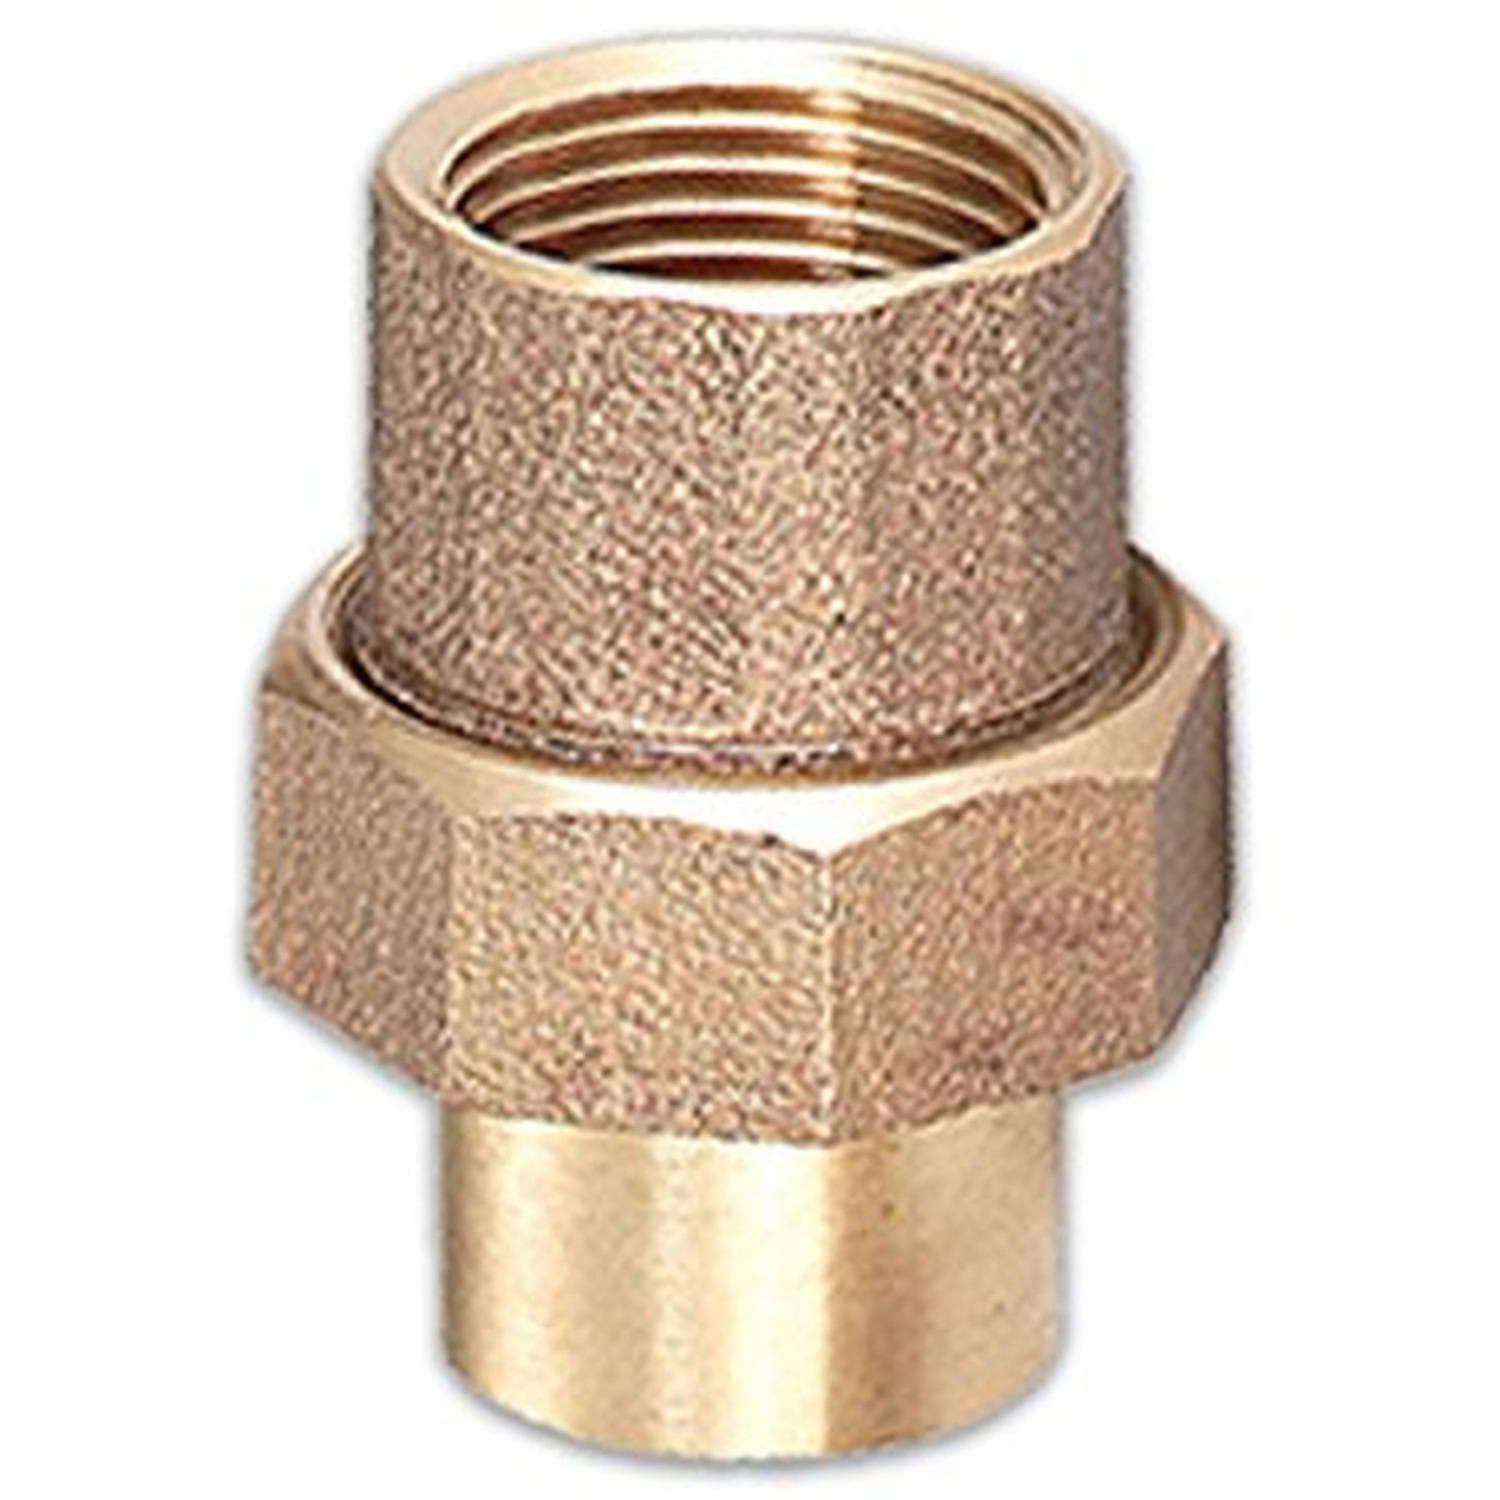 Everflow Supplies CCCU0034-NL 3/4 Nominal Size Lead Free Copper Straight Union with Sweat Sockets for Use with 7/8 OD Copper Pipe